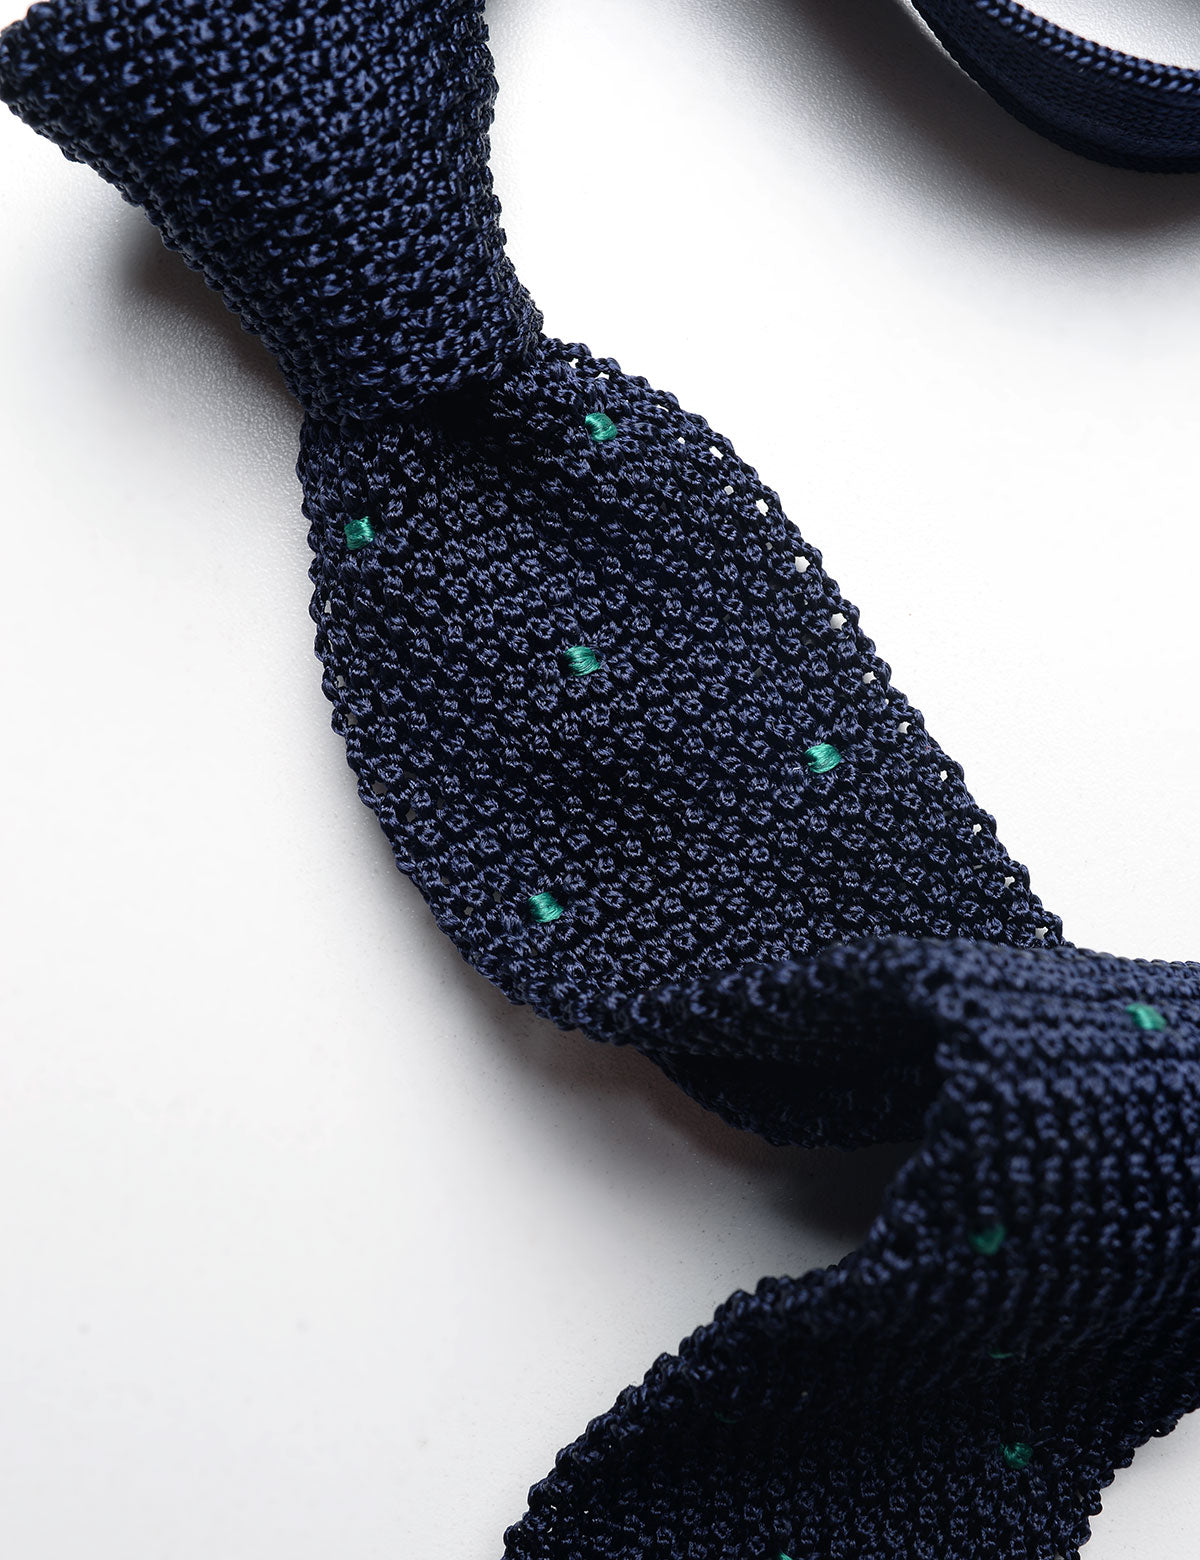 Close-up of Fumeo Carlo Dot Pattern Silk Knit Tie - Navy & Green showing knit and pattern